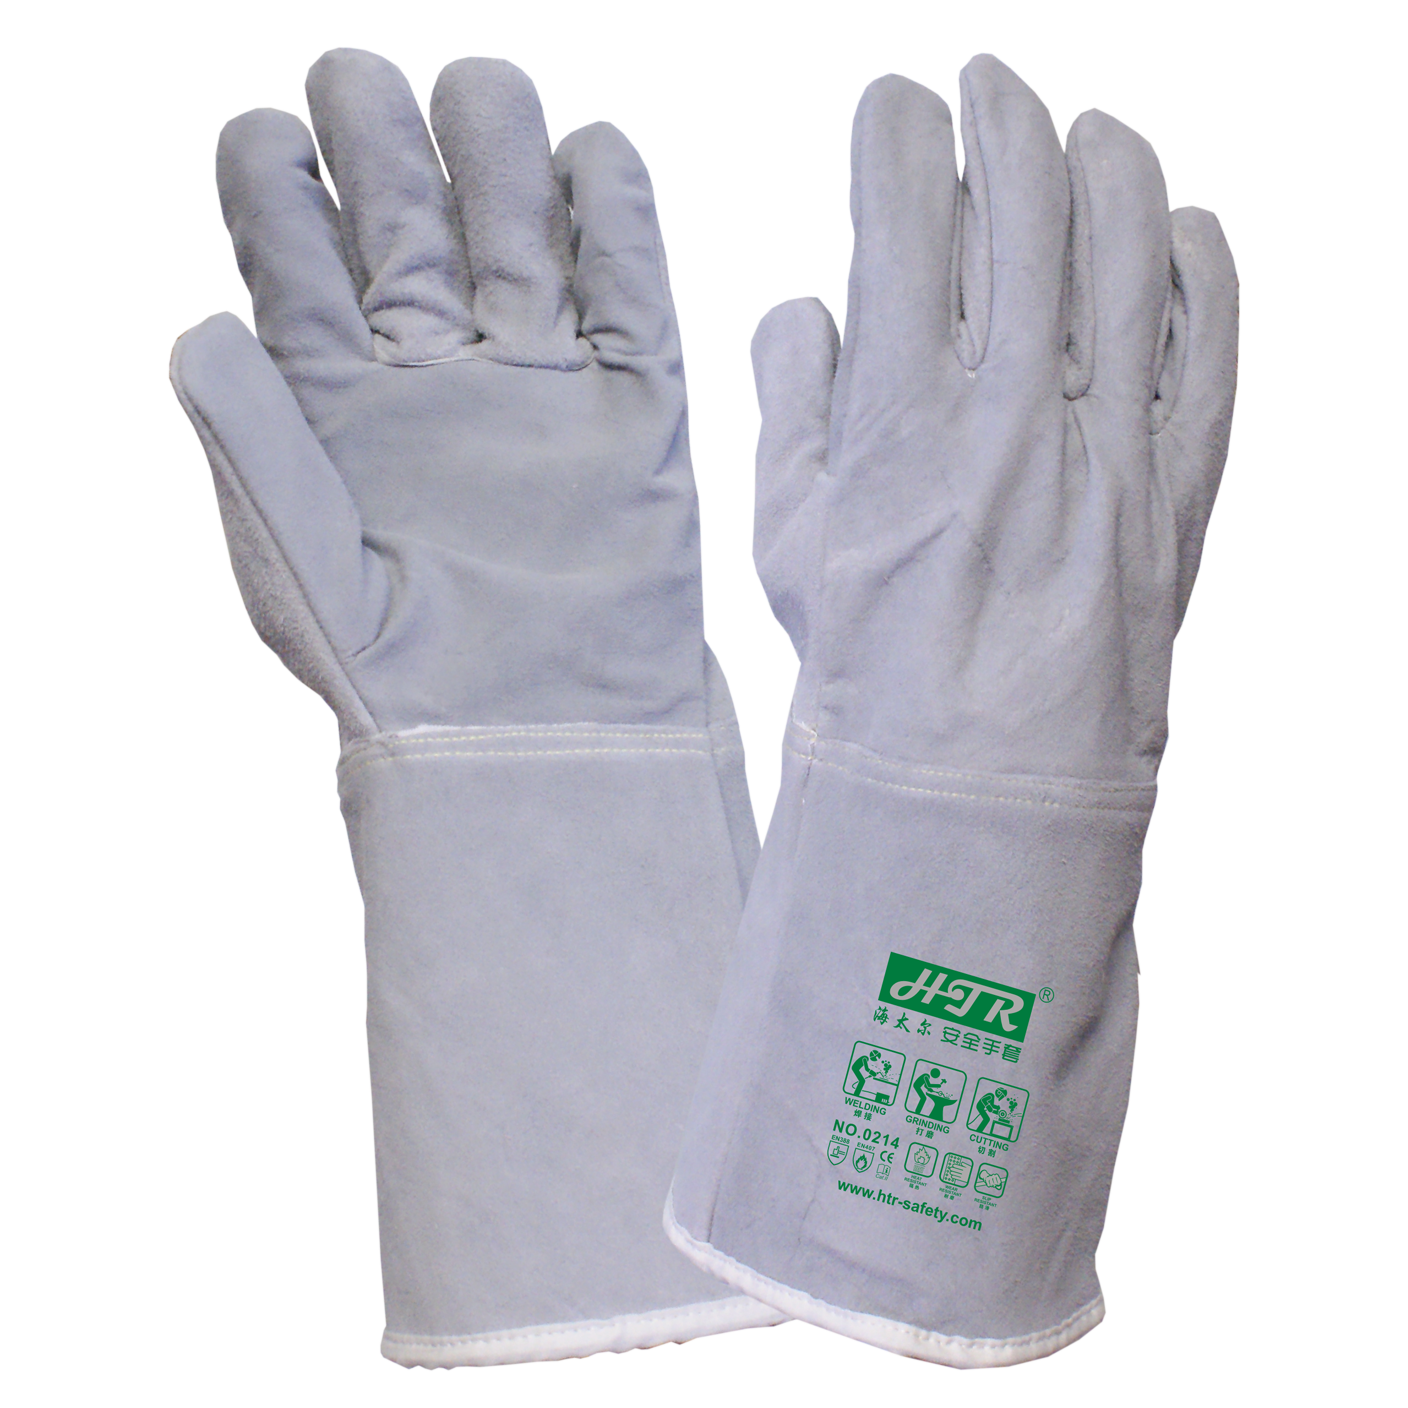 Cow leather welding gloves